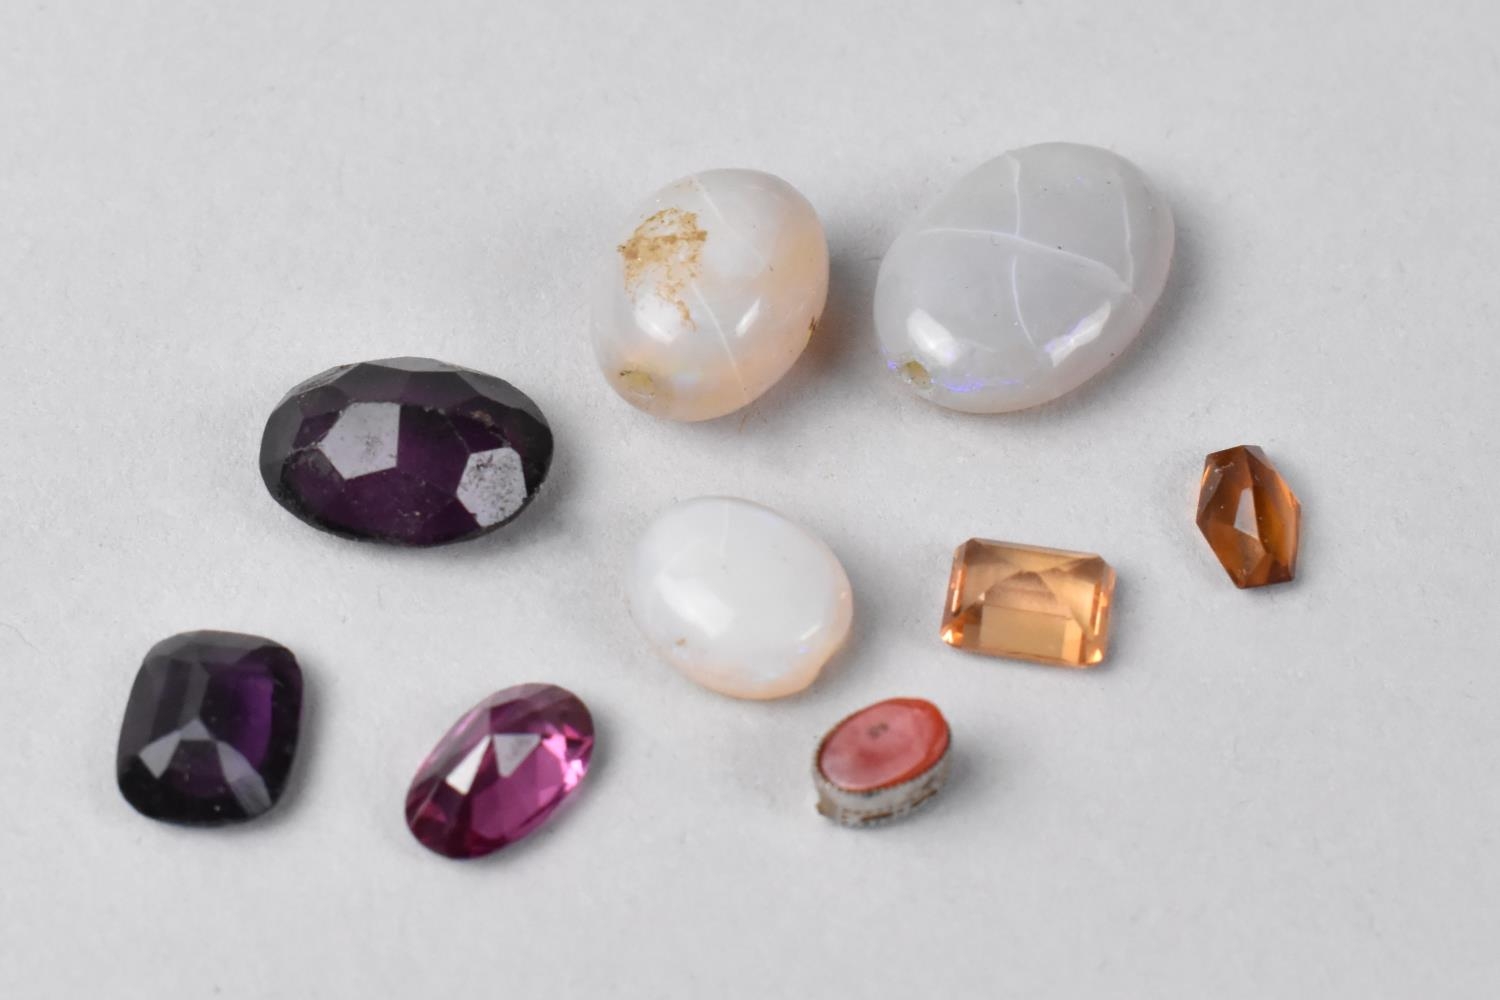 A Collection of Various Cut Stones to include Amethyst and Citrine types together with Three Opal